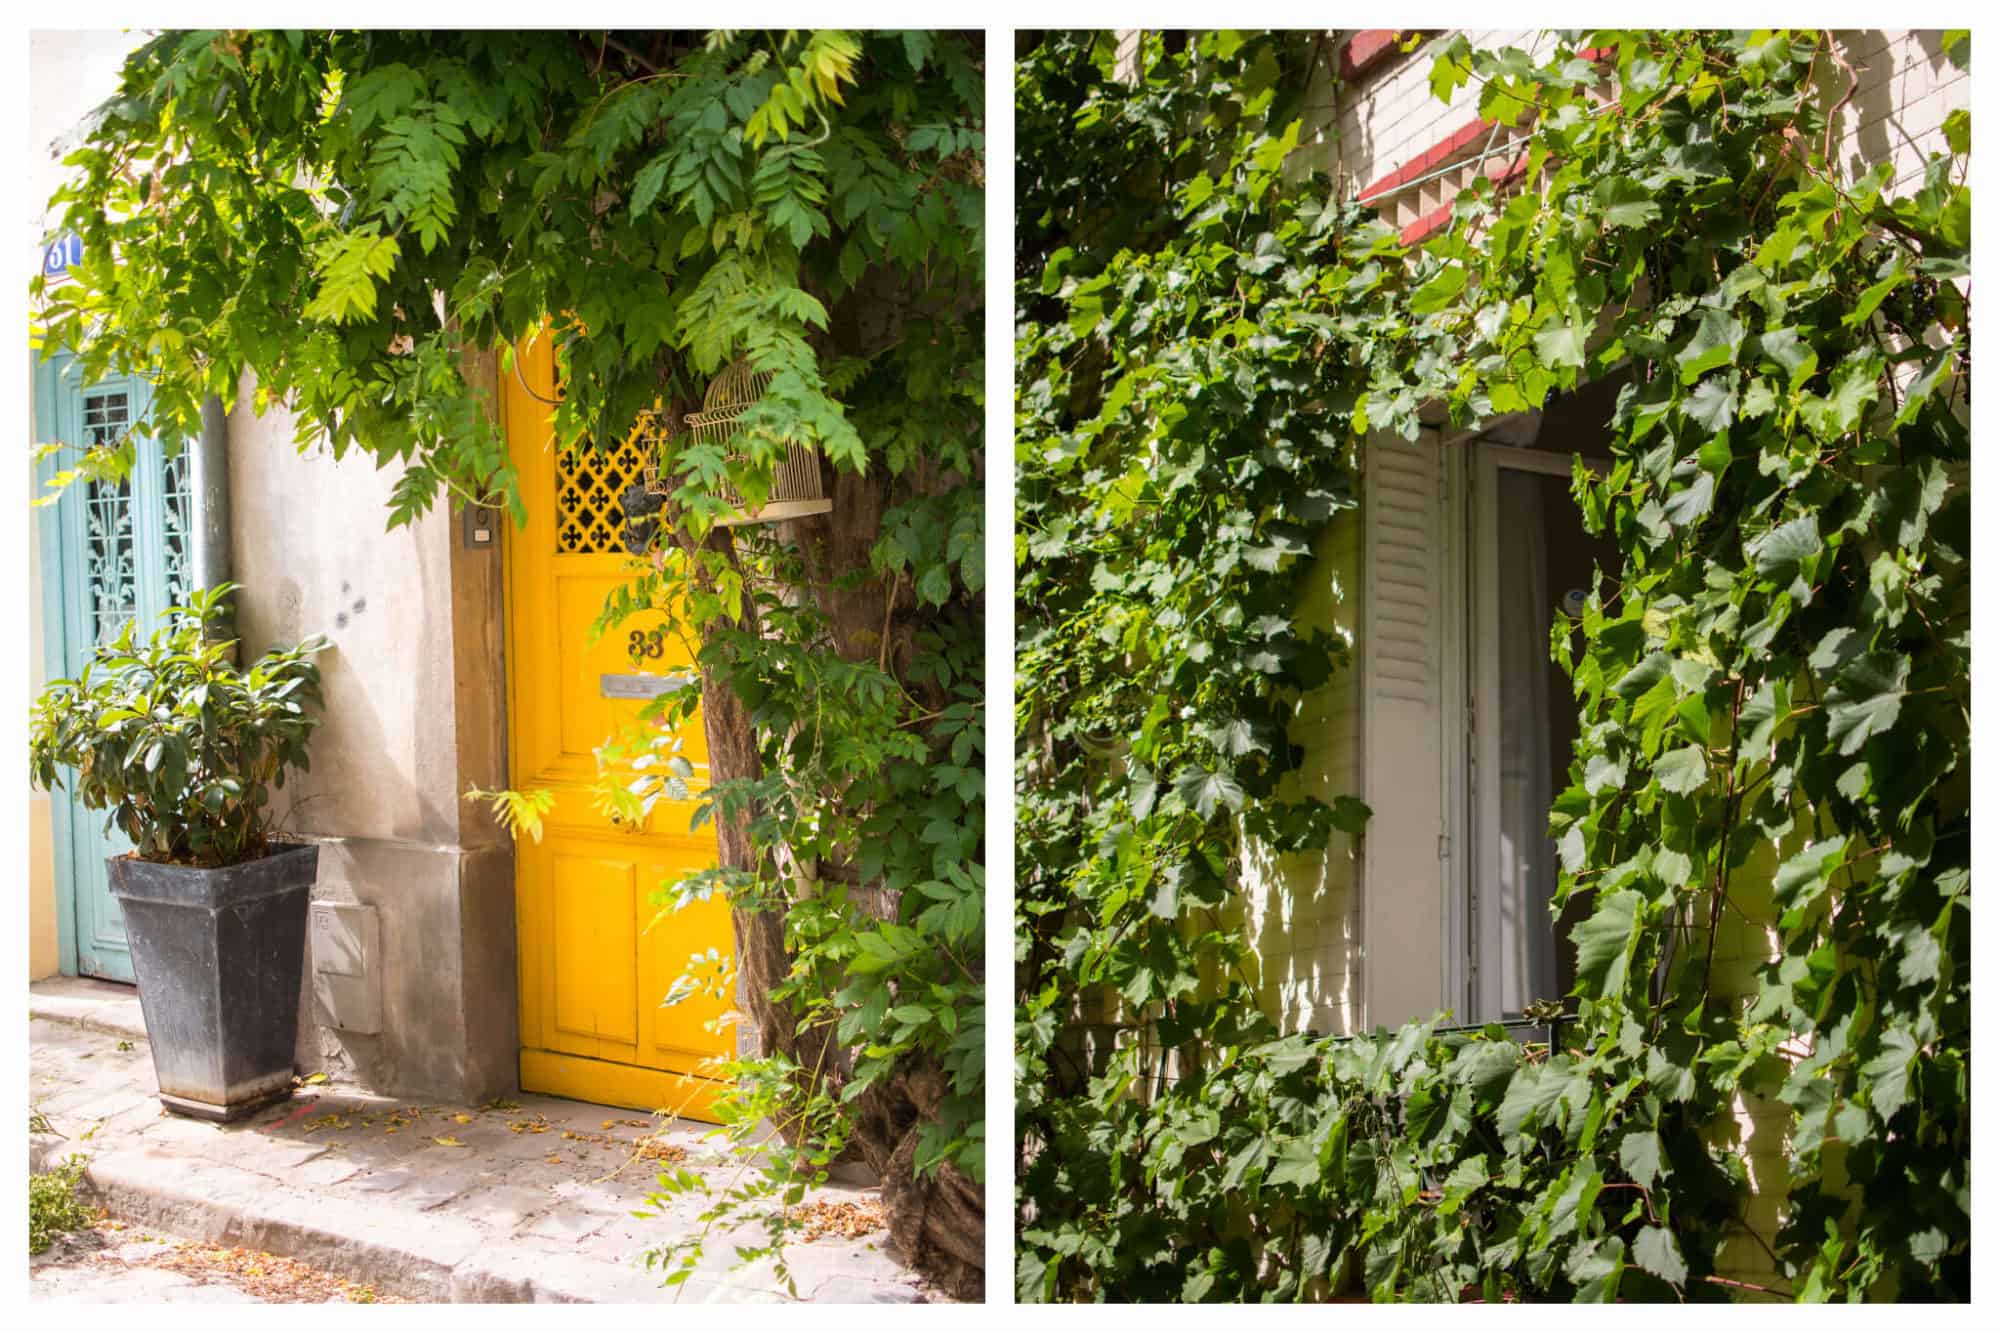 On left: A bright, mustard-yellow door can't hide behind the drooping vines on rue des Thermopyles in Paris' 14th arrondissement. On right: An open window sits open on a sunny day, light shining brightly on the abundance of leaves surrounding it.